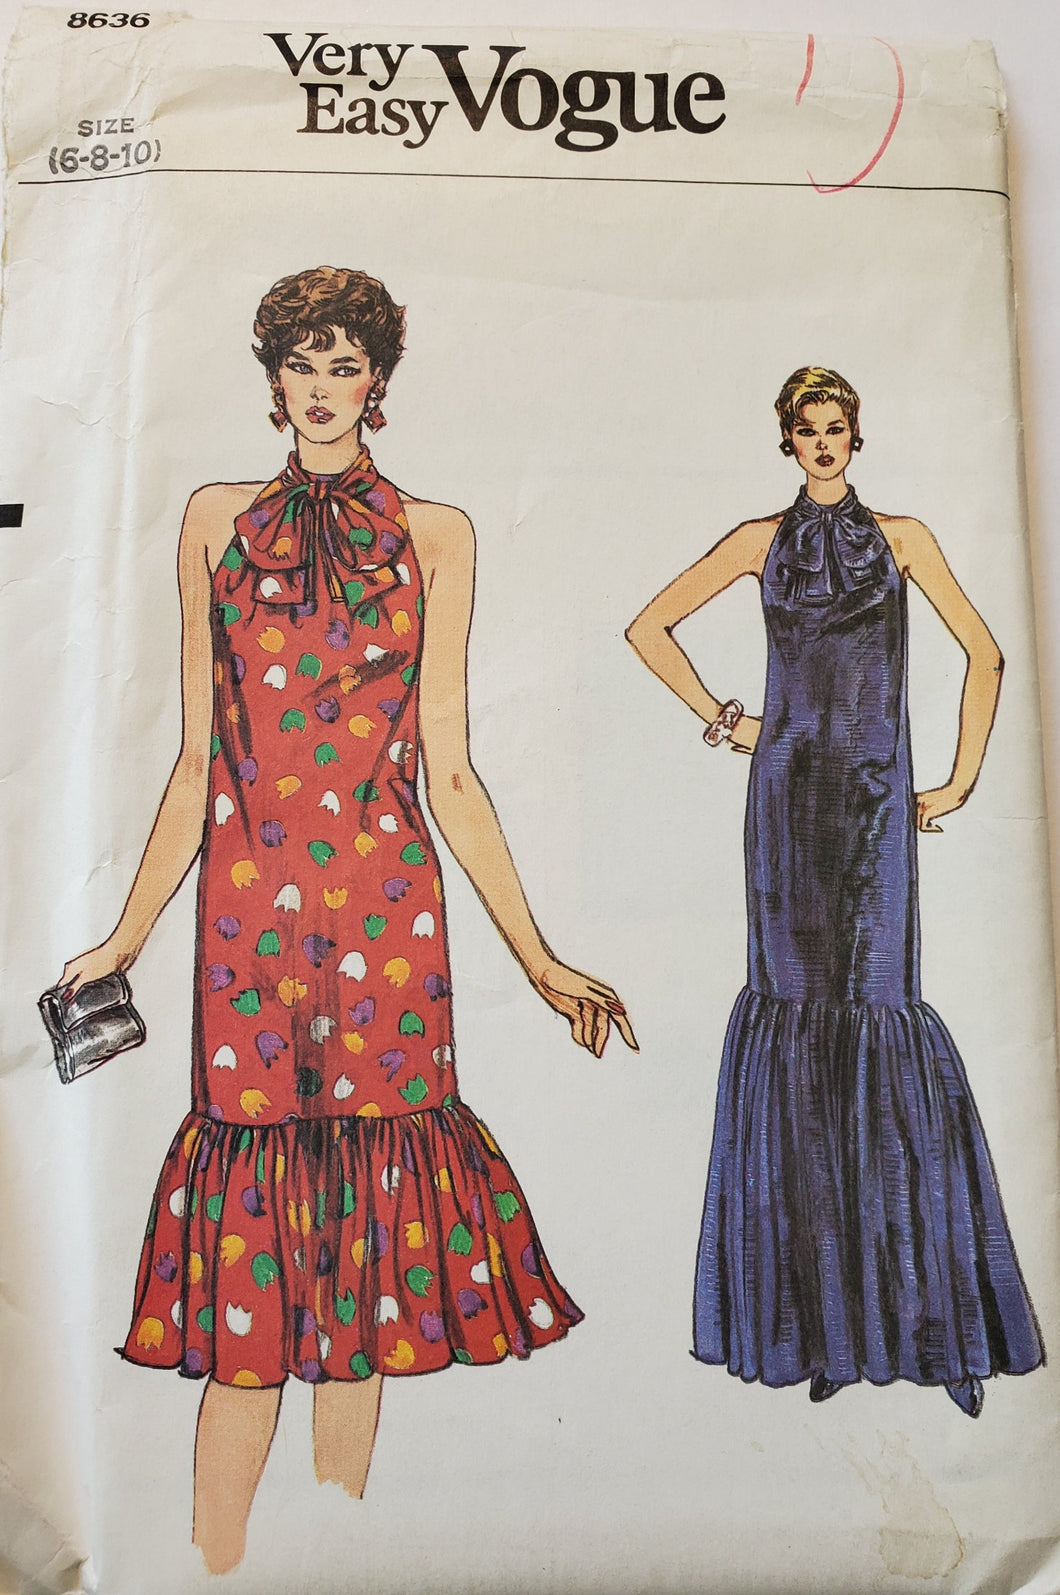 Vogue Pattern 8636, UNCUT Very Easy Vogue, Dress, Size 6-8-10, Vintage and Rare